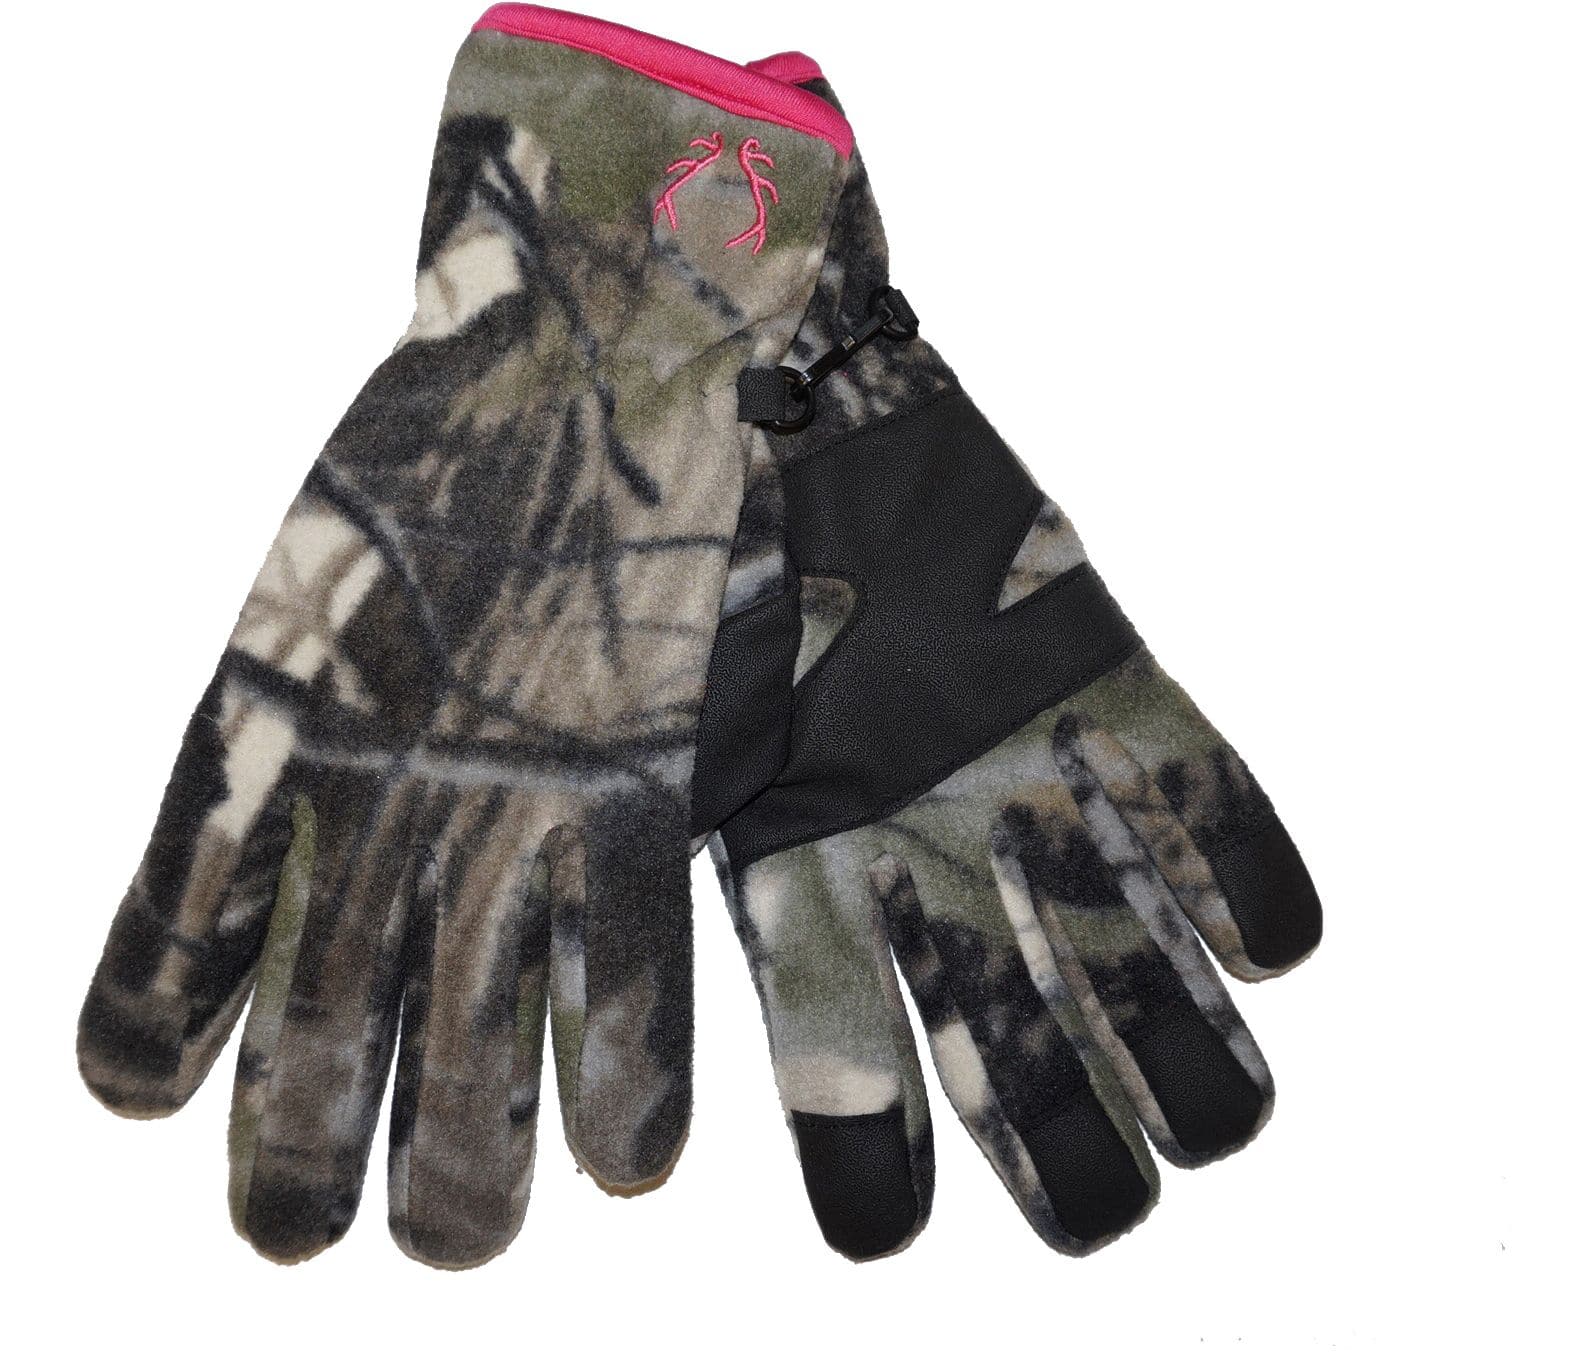 https://media-www.canadiantire.ca/product/playing/hunting/hunting-apparel-footwear/1759049/womens-camo-fleece-glove-sm-med-8f664764-efdc-46e6-ab0c-aba5e92573fa-jpgrendition.jpg